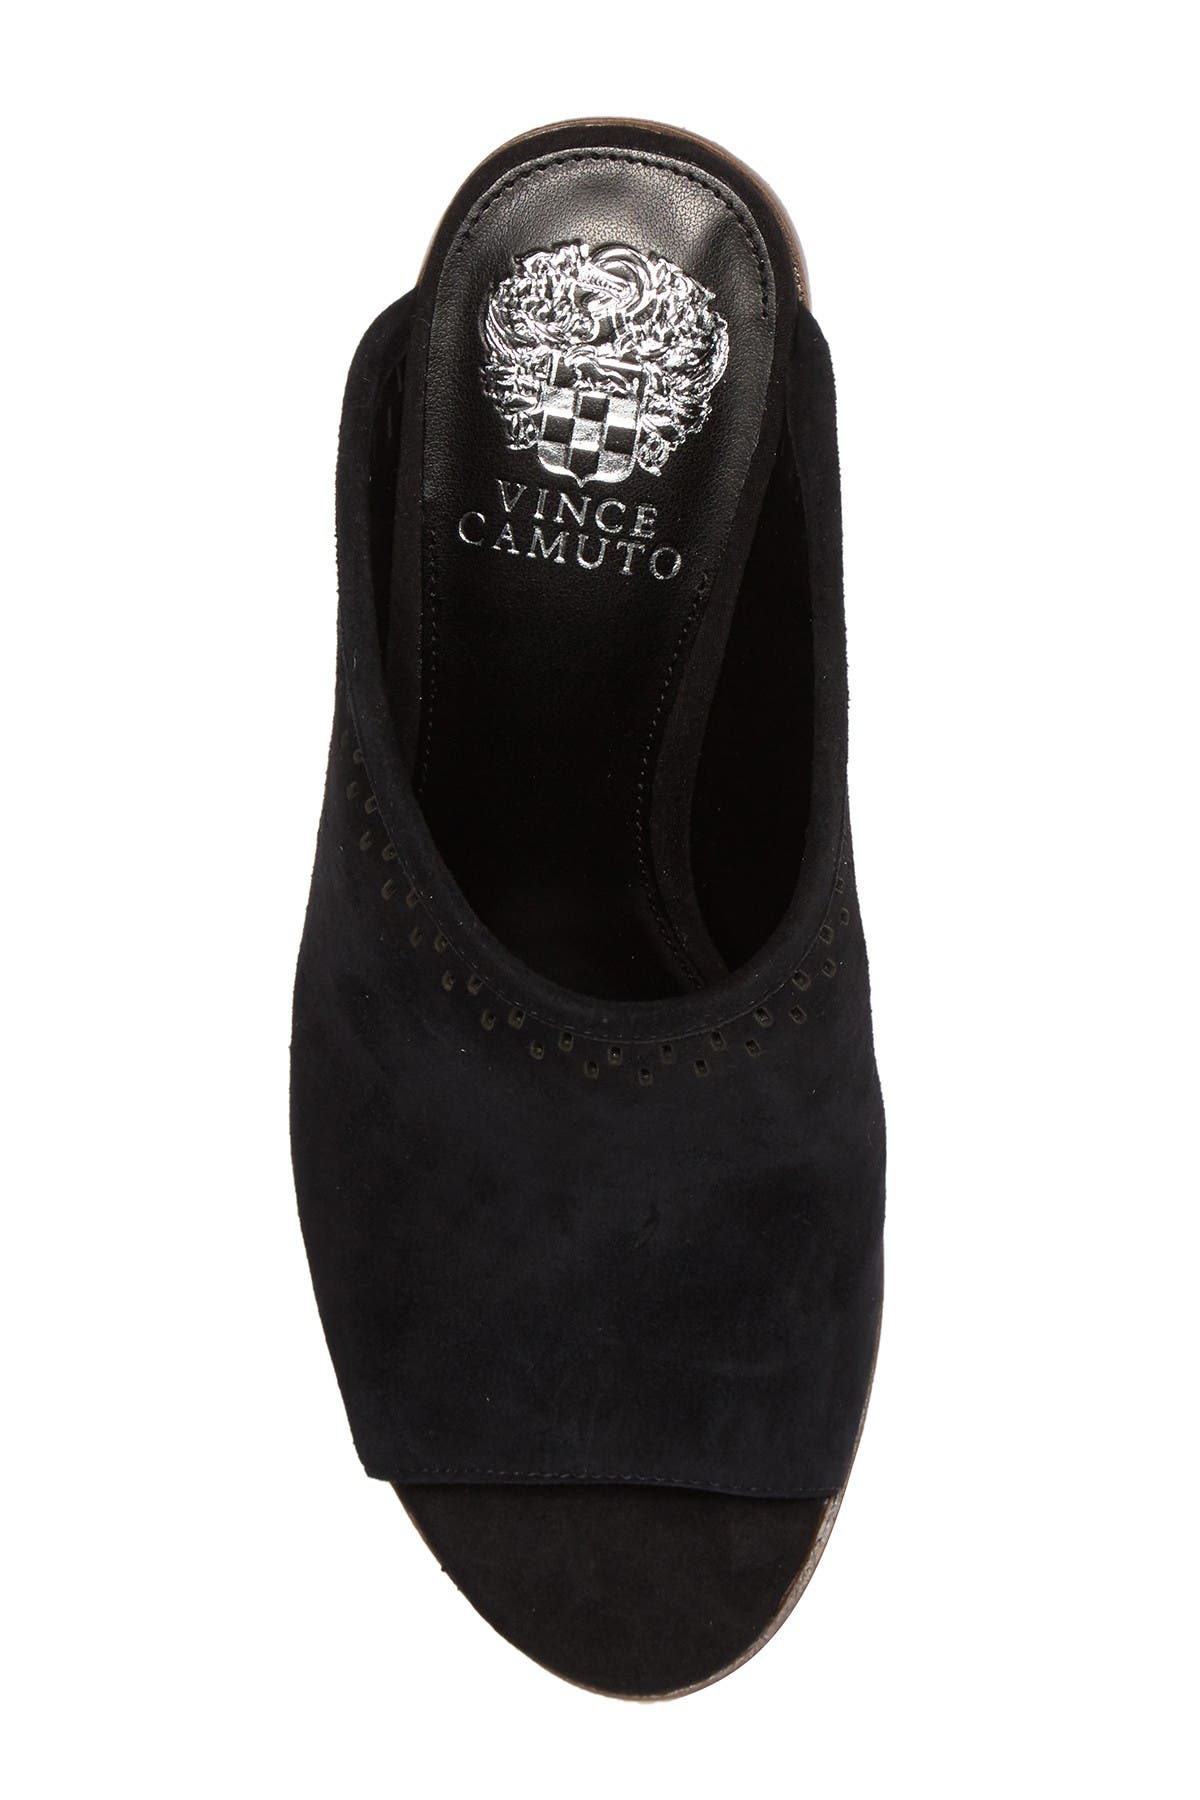 vince camuto merlyna suede mule